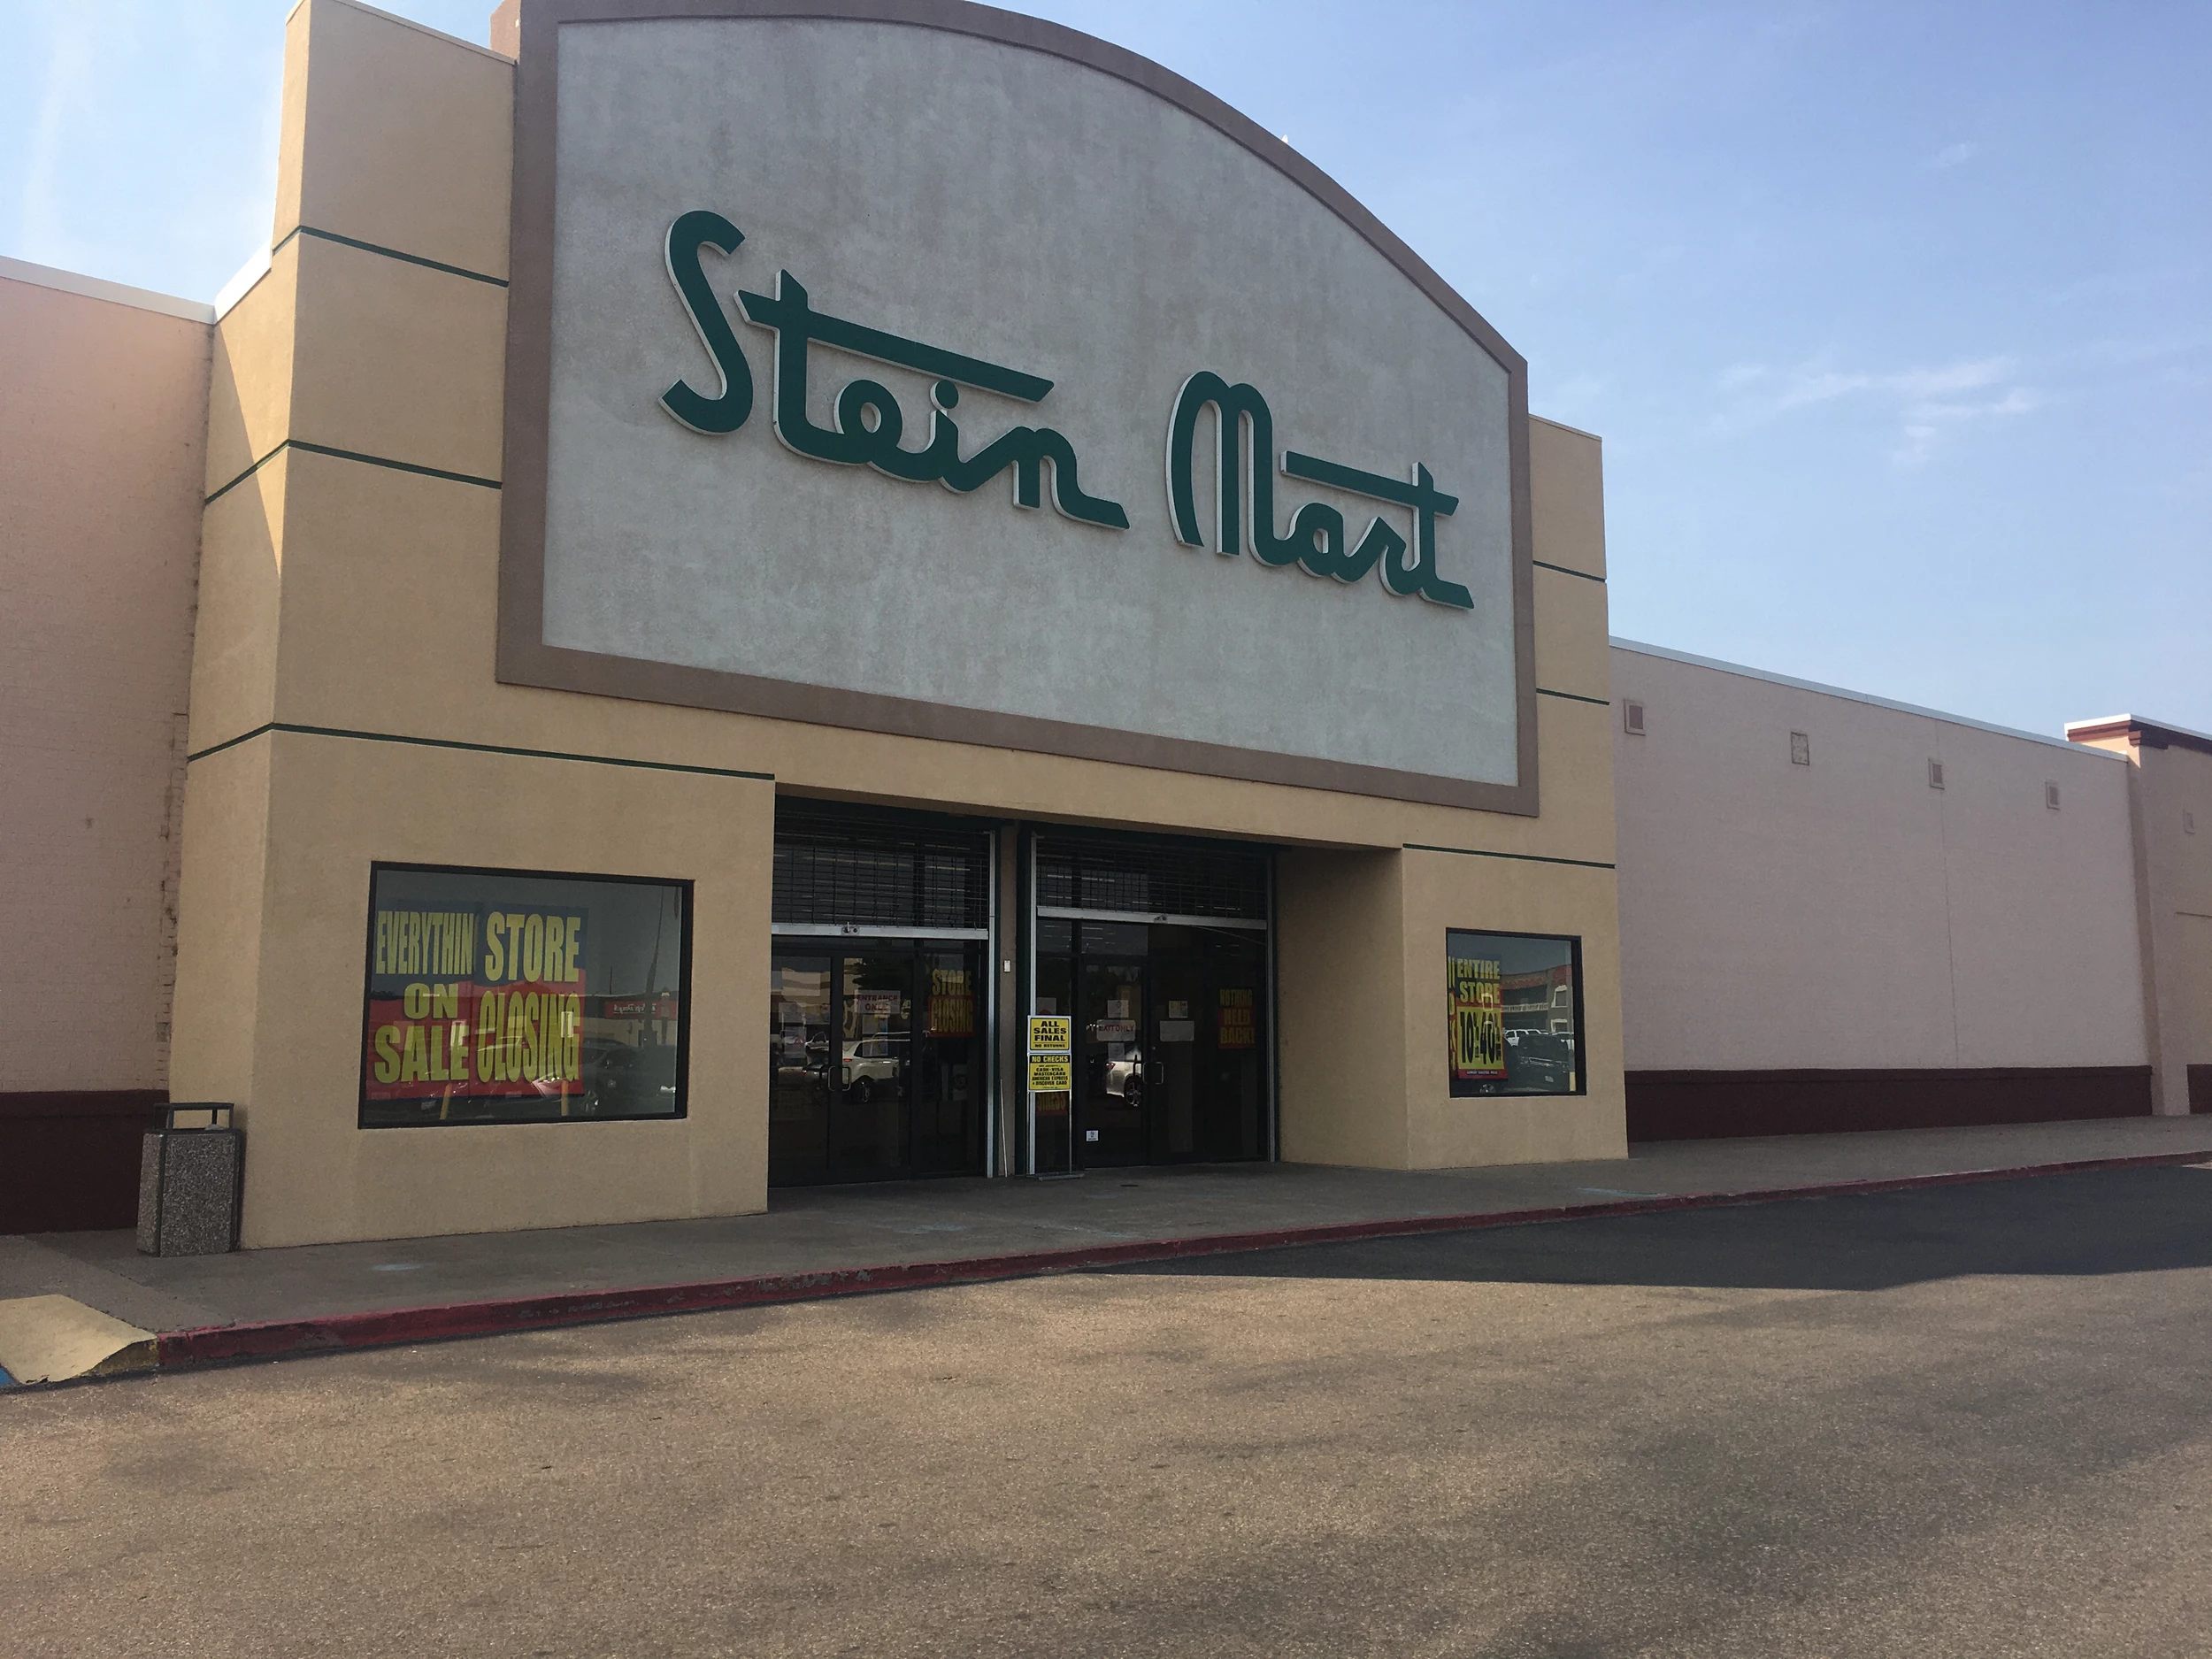 Stein Mart Grand Opening - Fashion Trends and Friends